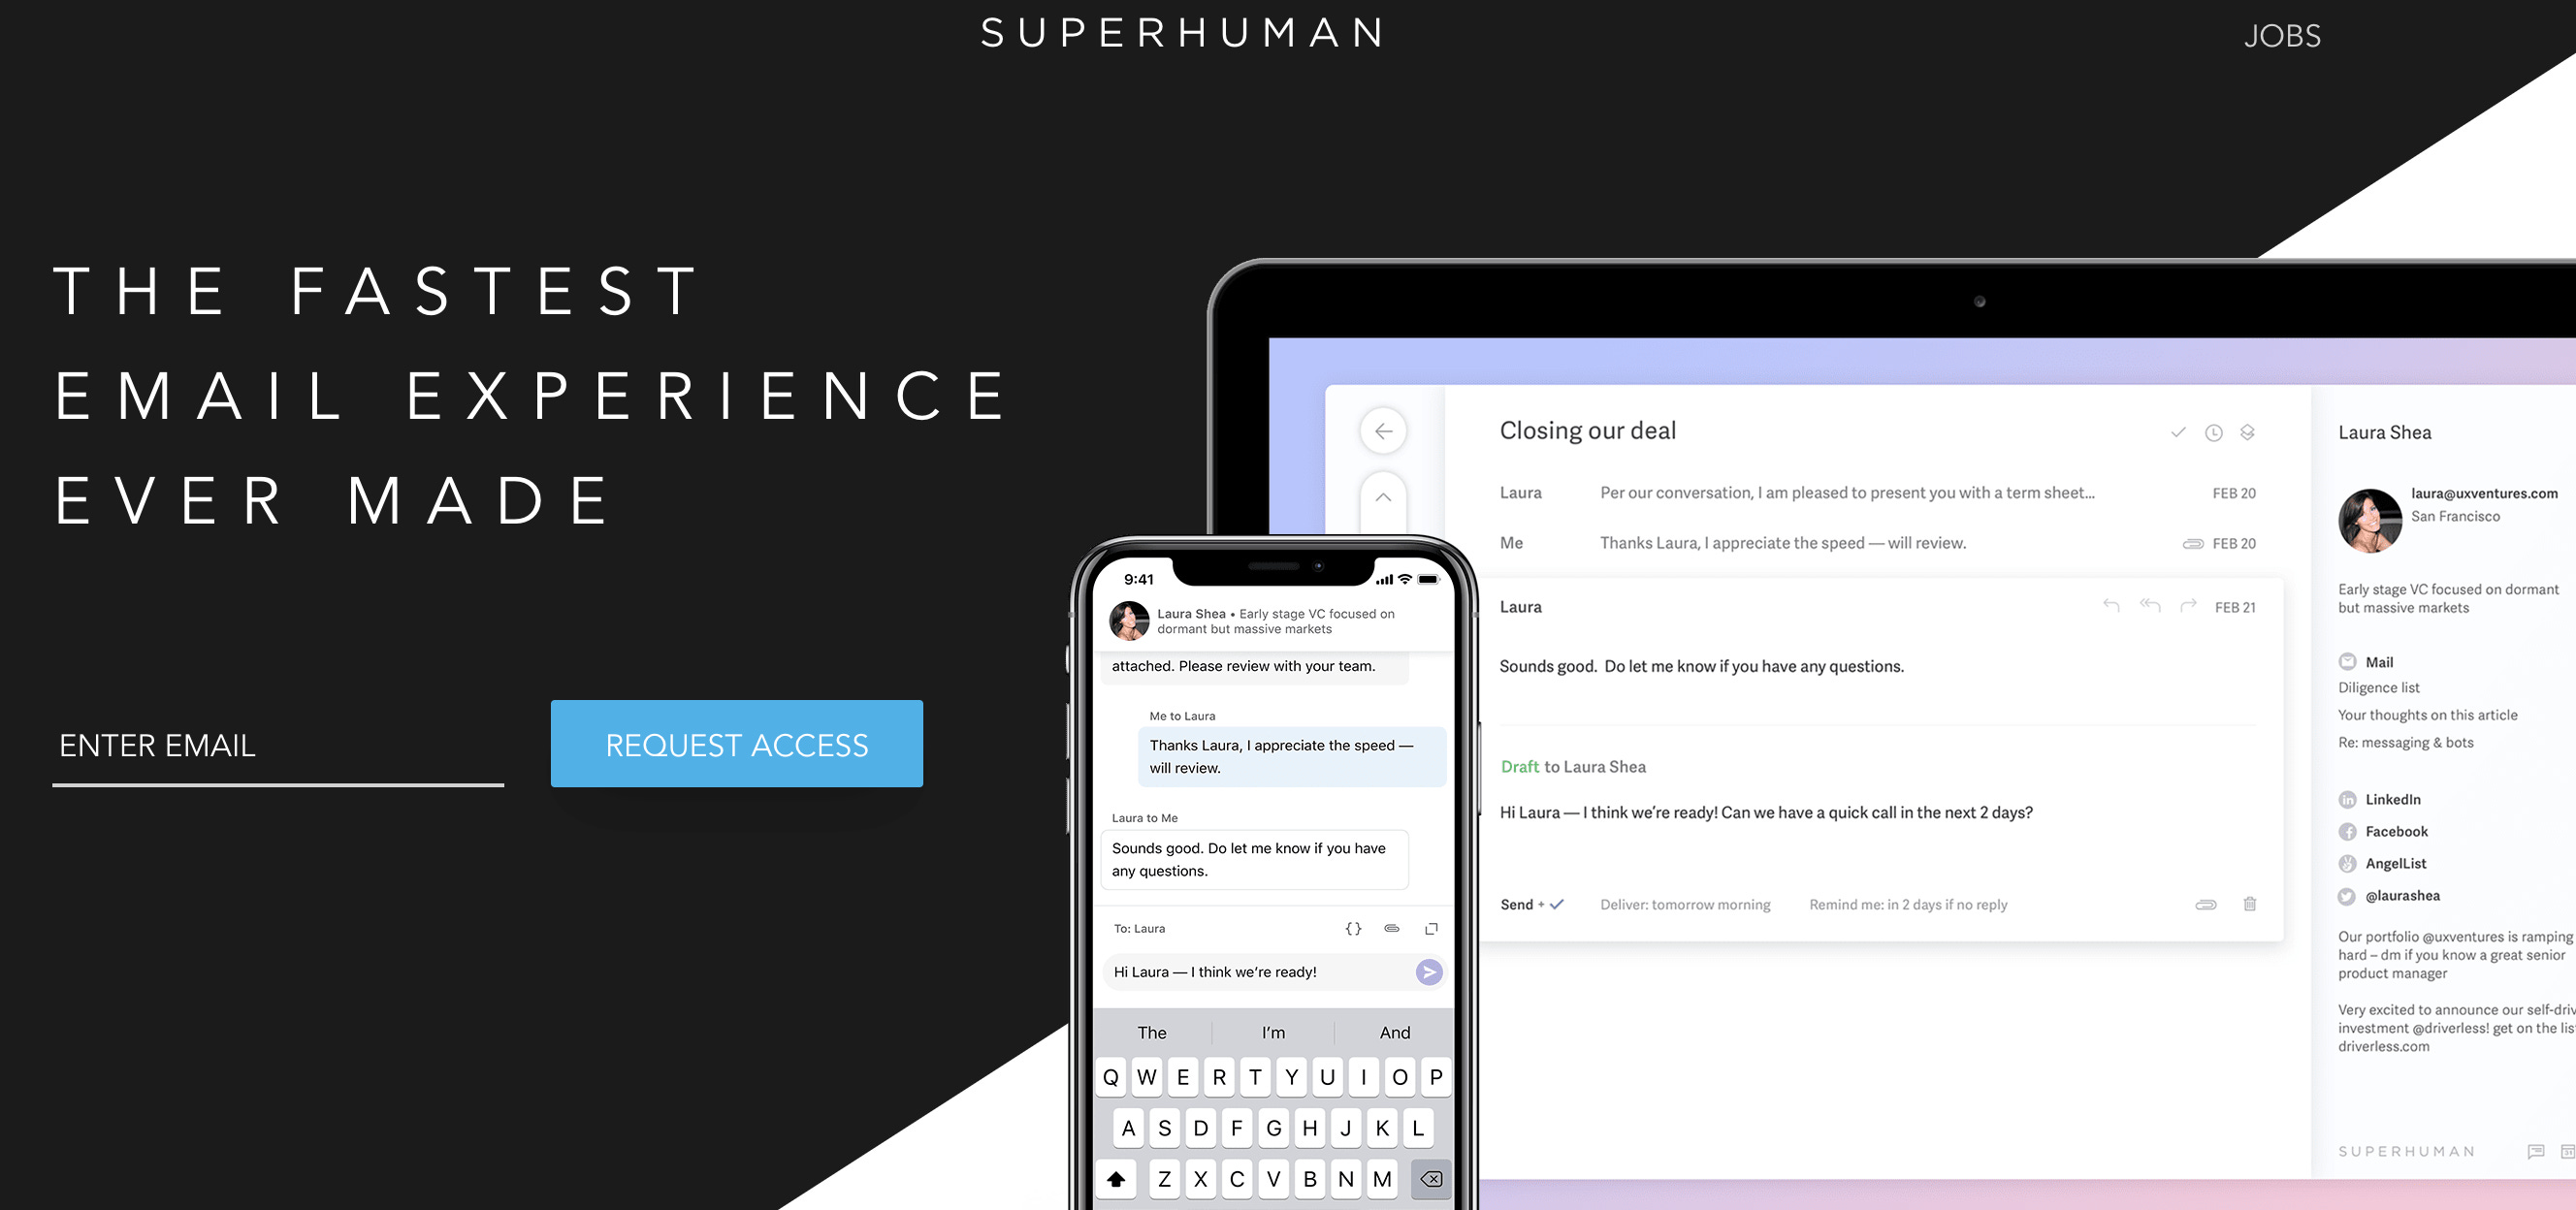 A Superhuman Tool for Email? - by Jeremy Caplan